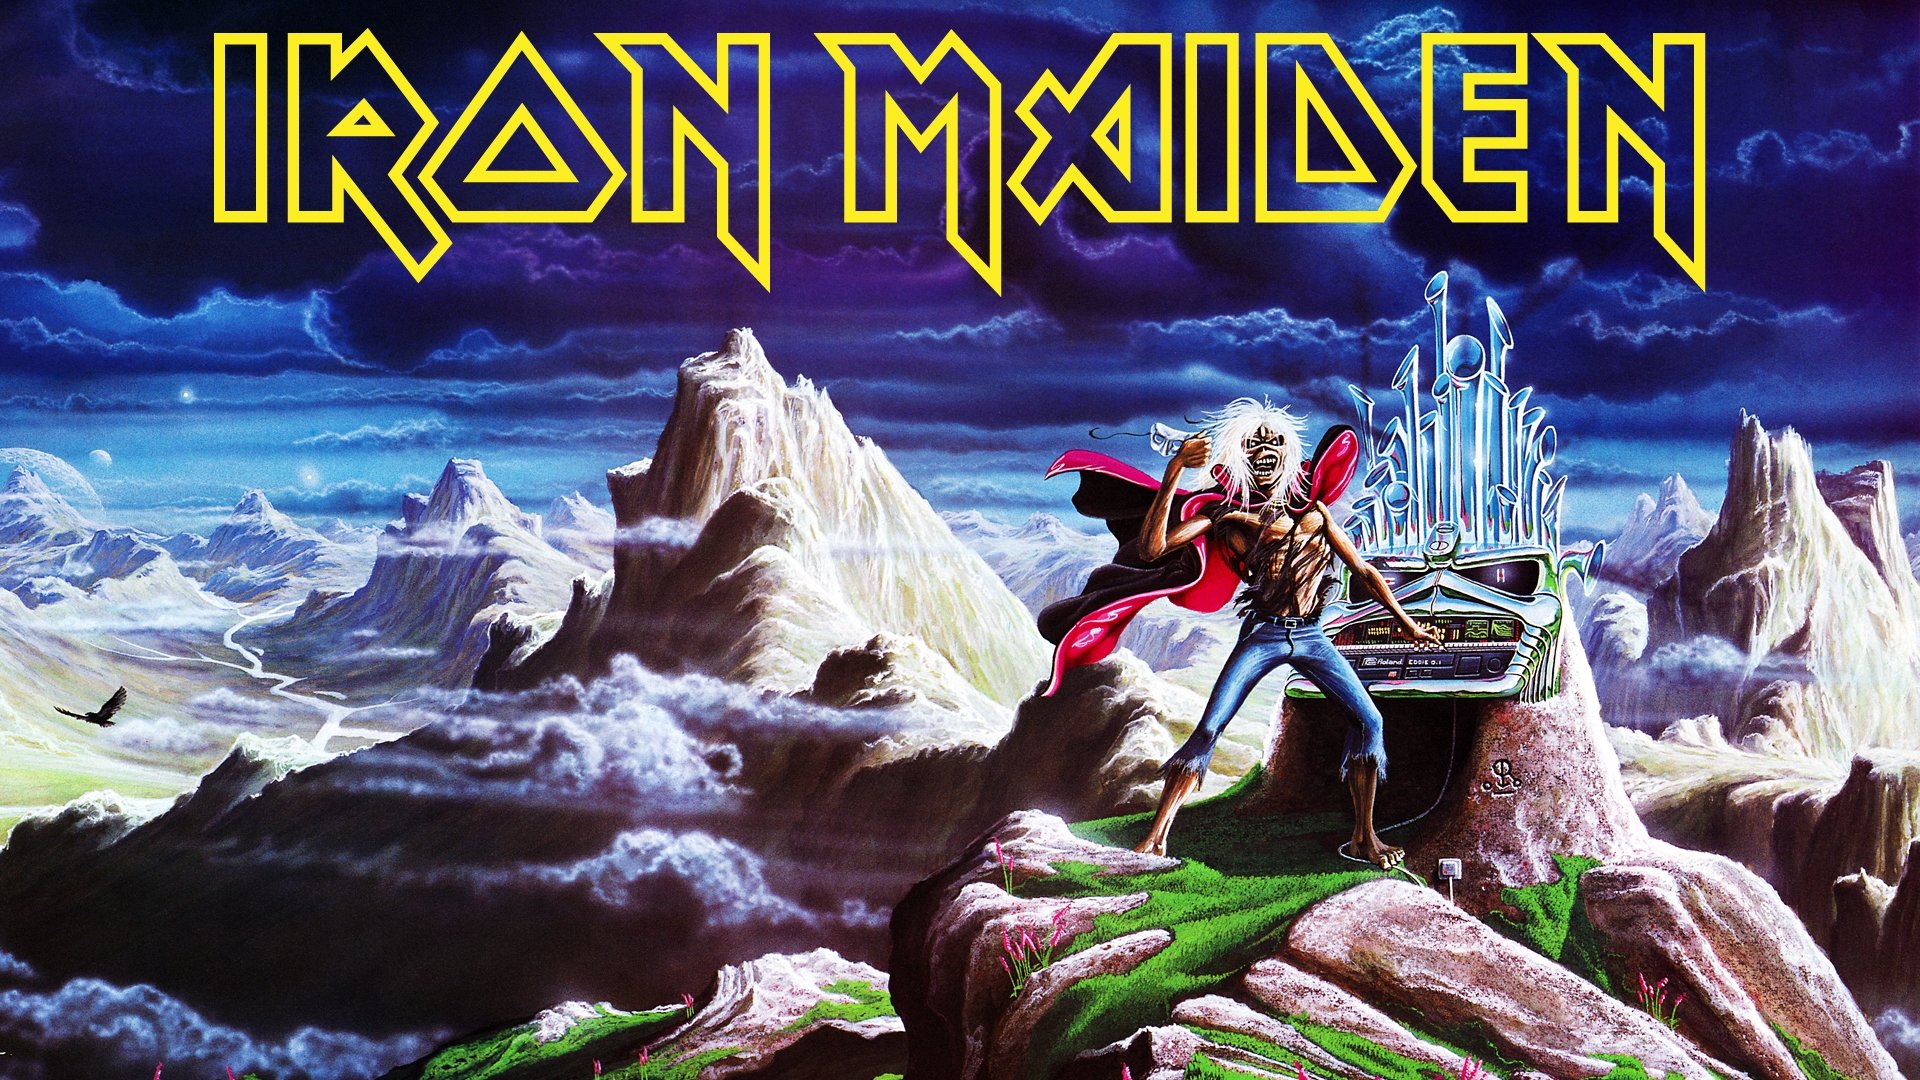 Awesome Iron Maiden free background ID:72578 for full hd 1920x1080 desktop